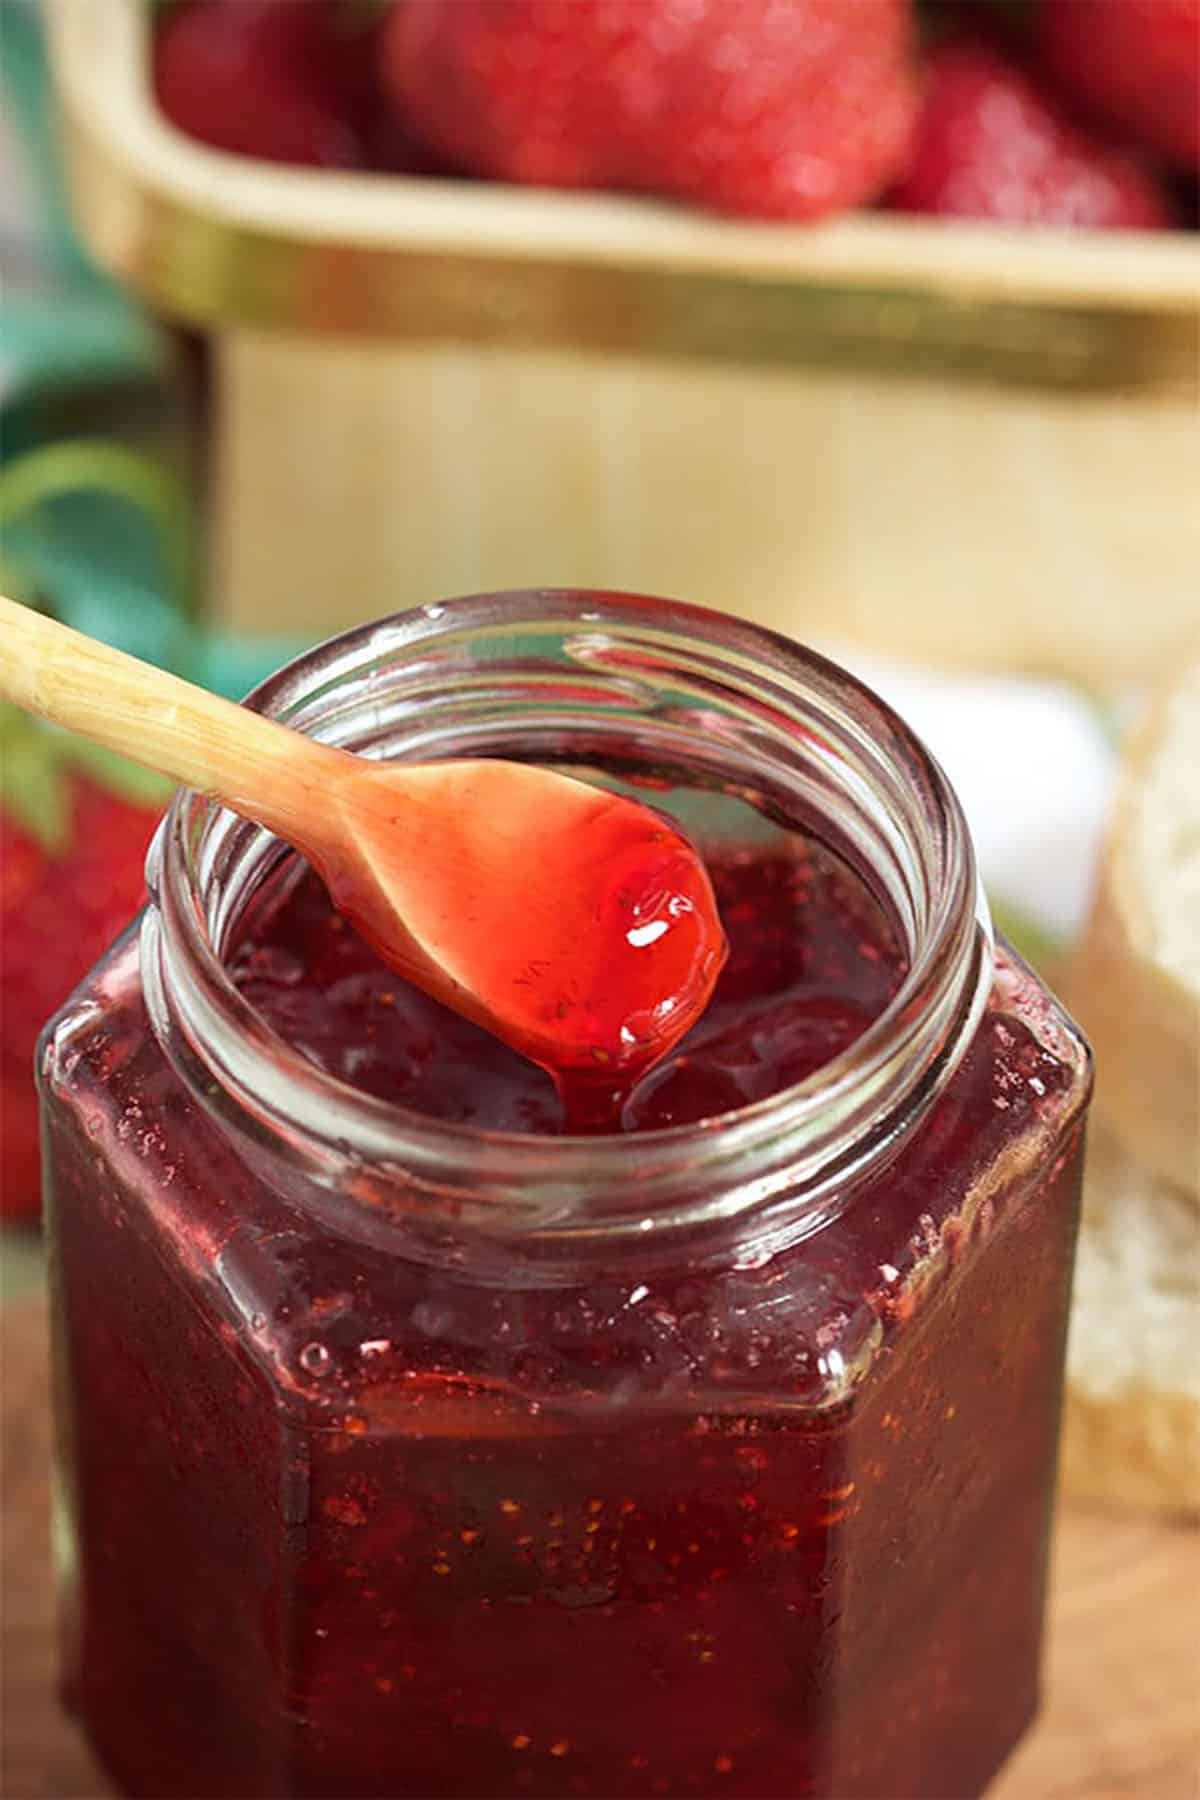 Strawberry jam in a jelly jar with a wooden spoon dipped into it.